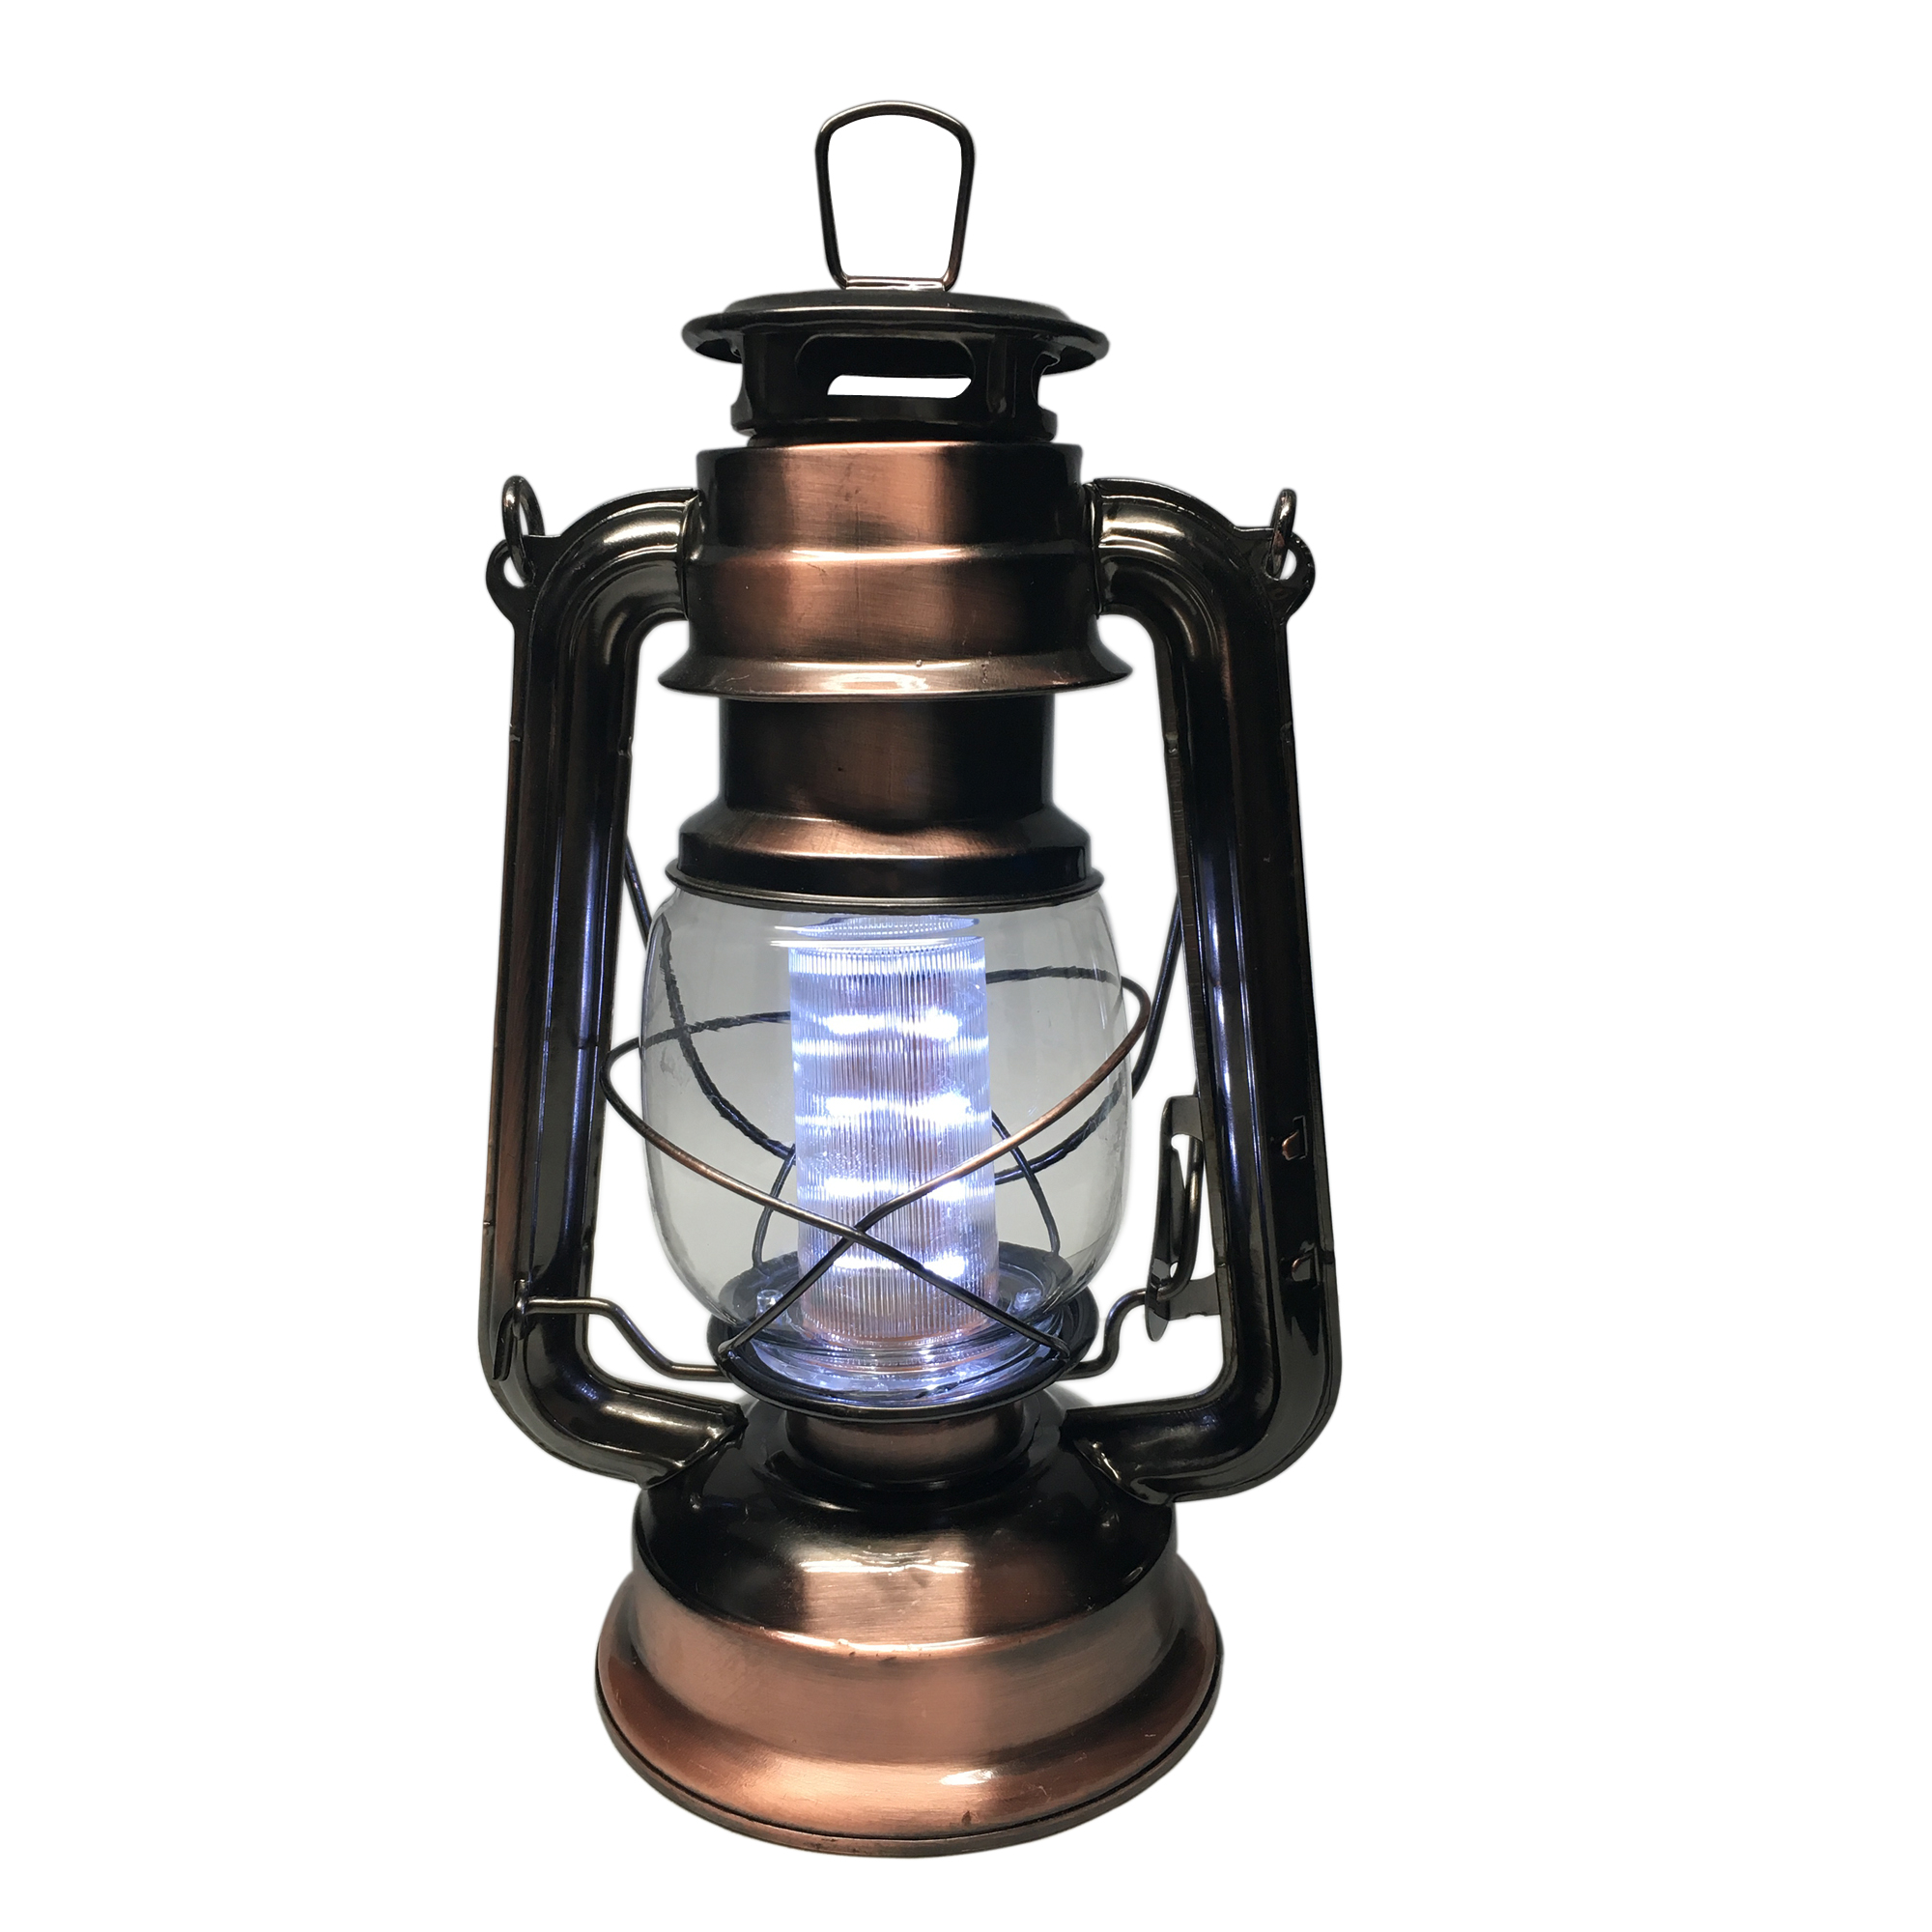 Dimmable Metallic Lantern w/12 LED Lights - Antique Copper